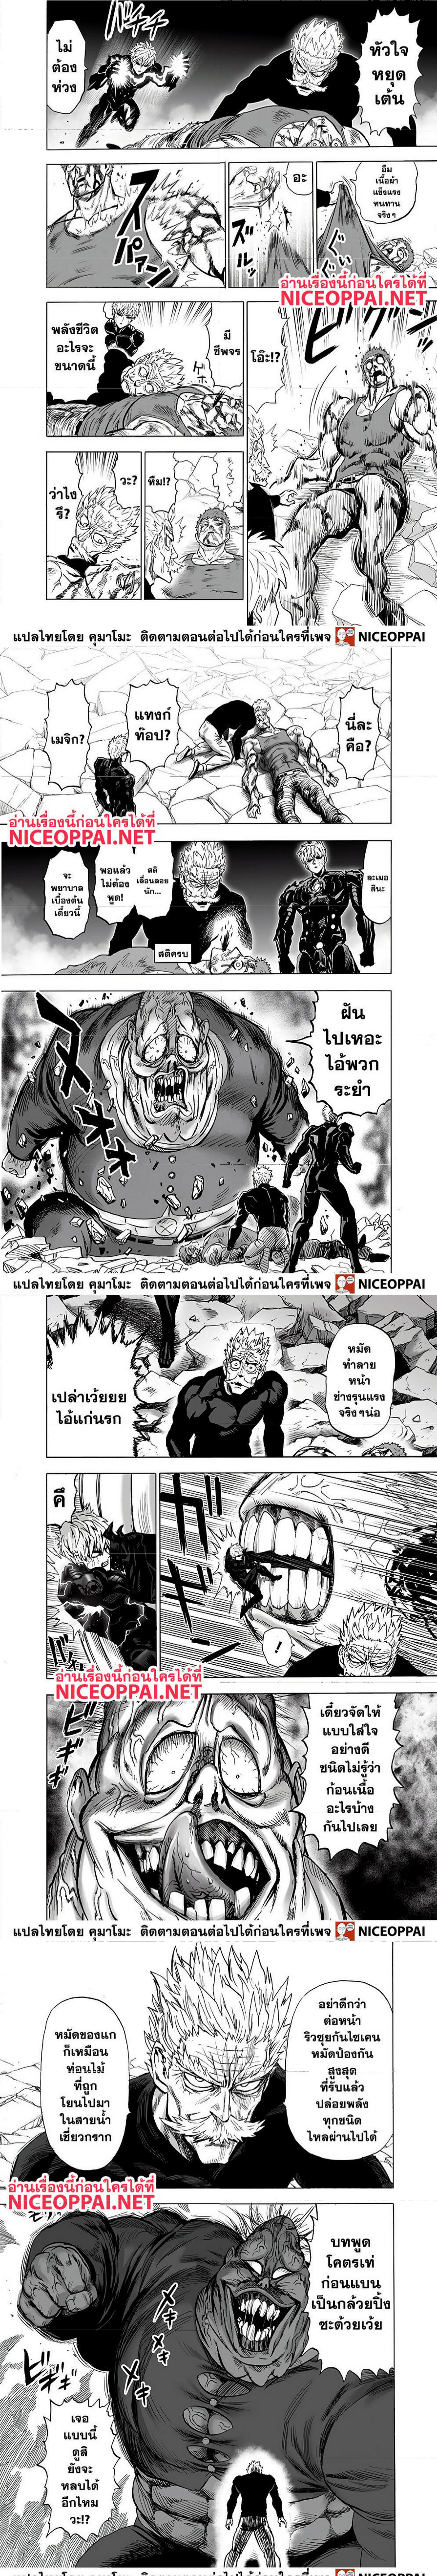 One Punch Man144.2 (4)